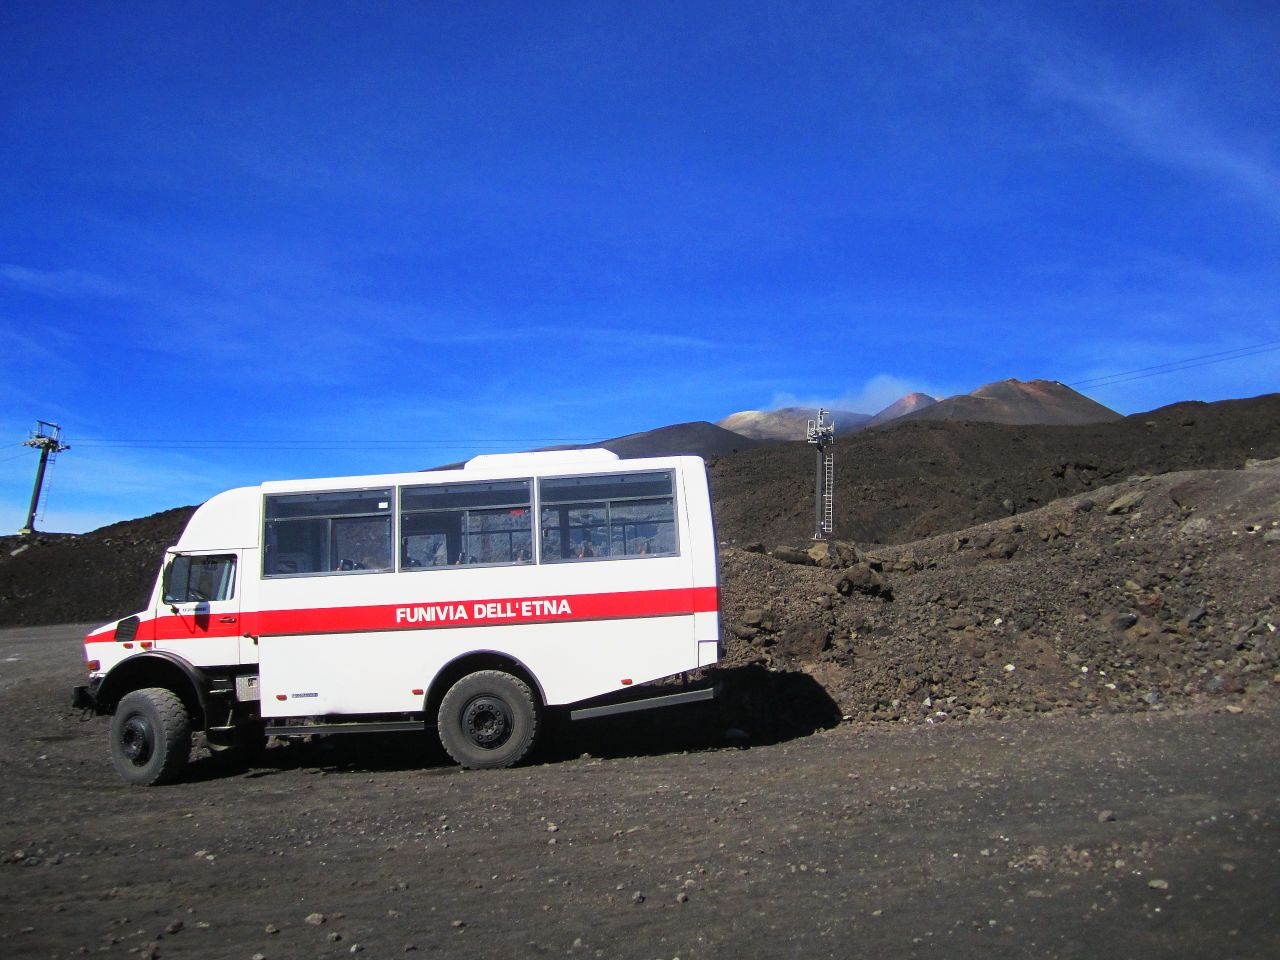 Visitors can take a cable car to about 2,800 meters up the mountain and transfer to 4x4 vehicles.